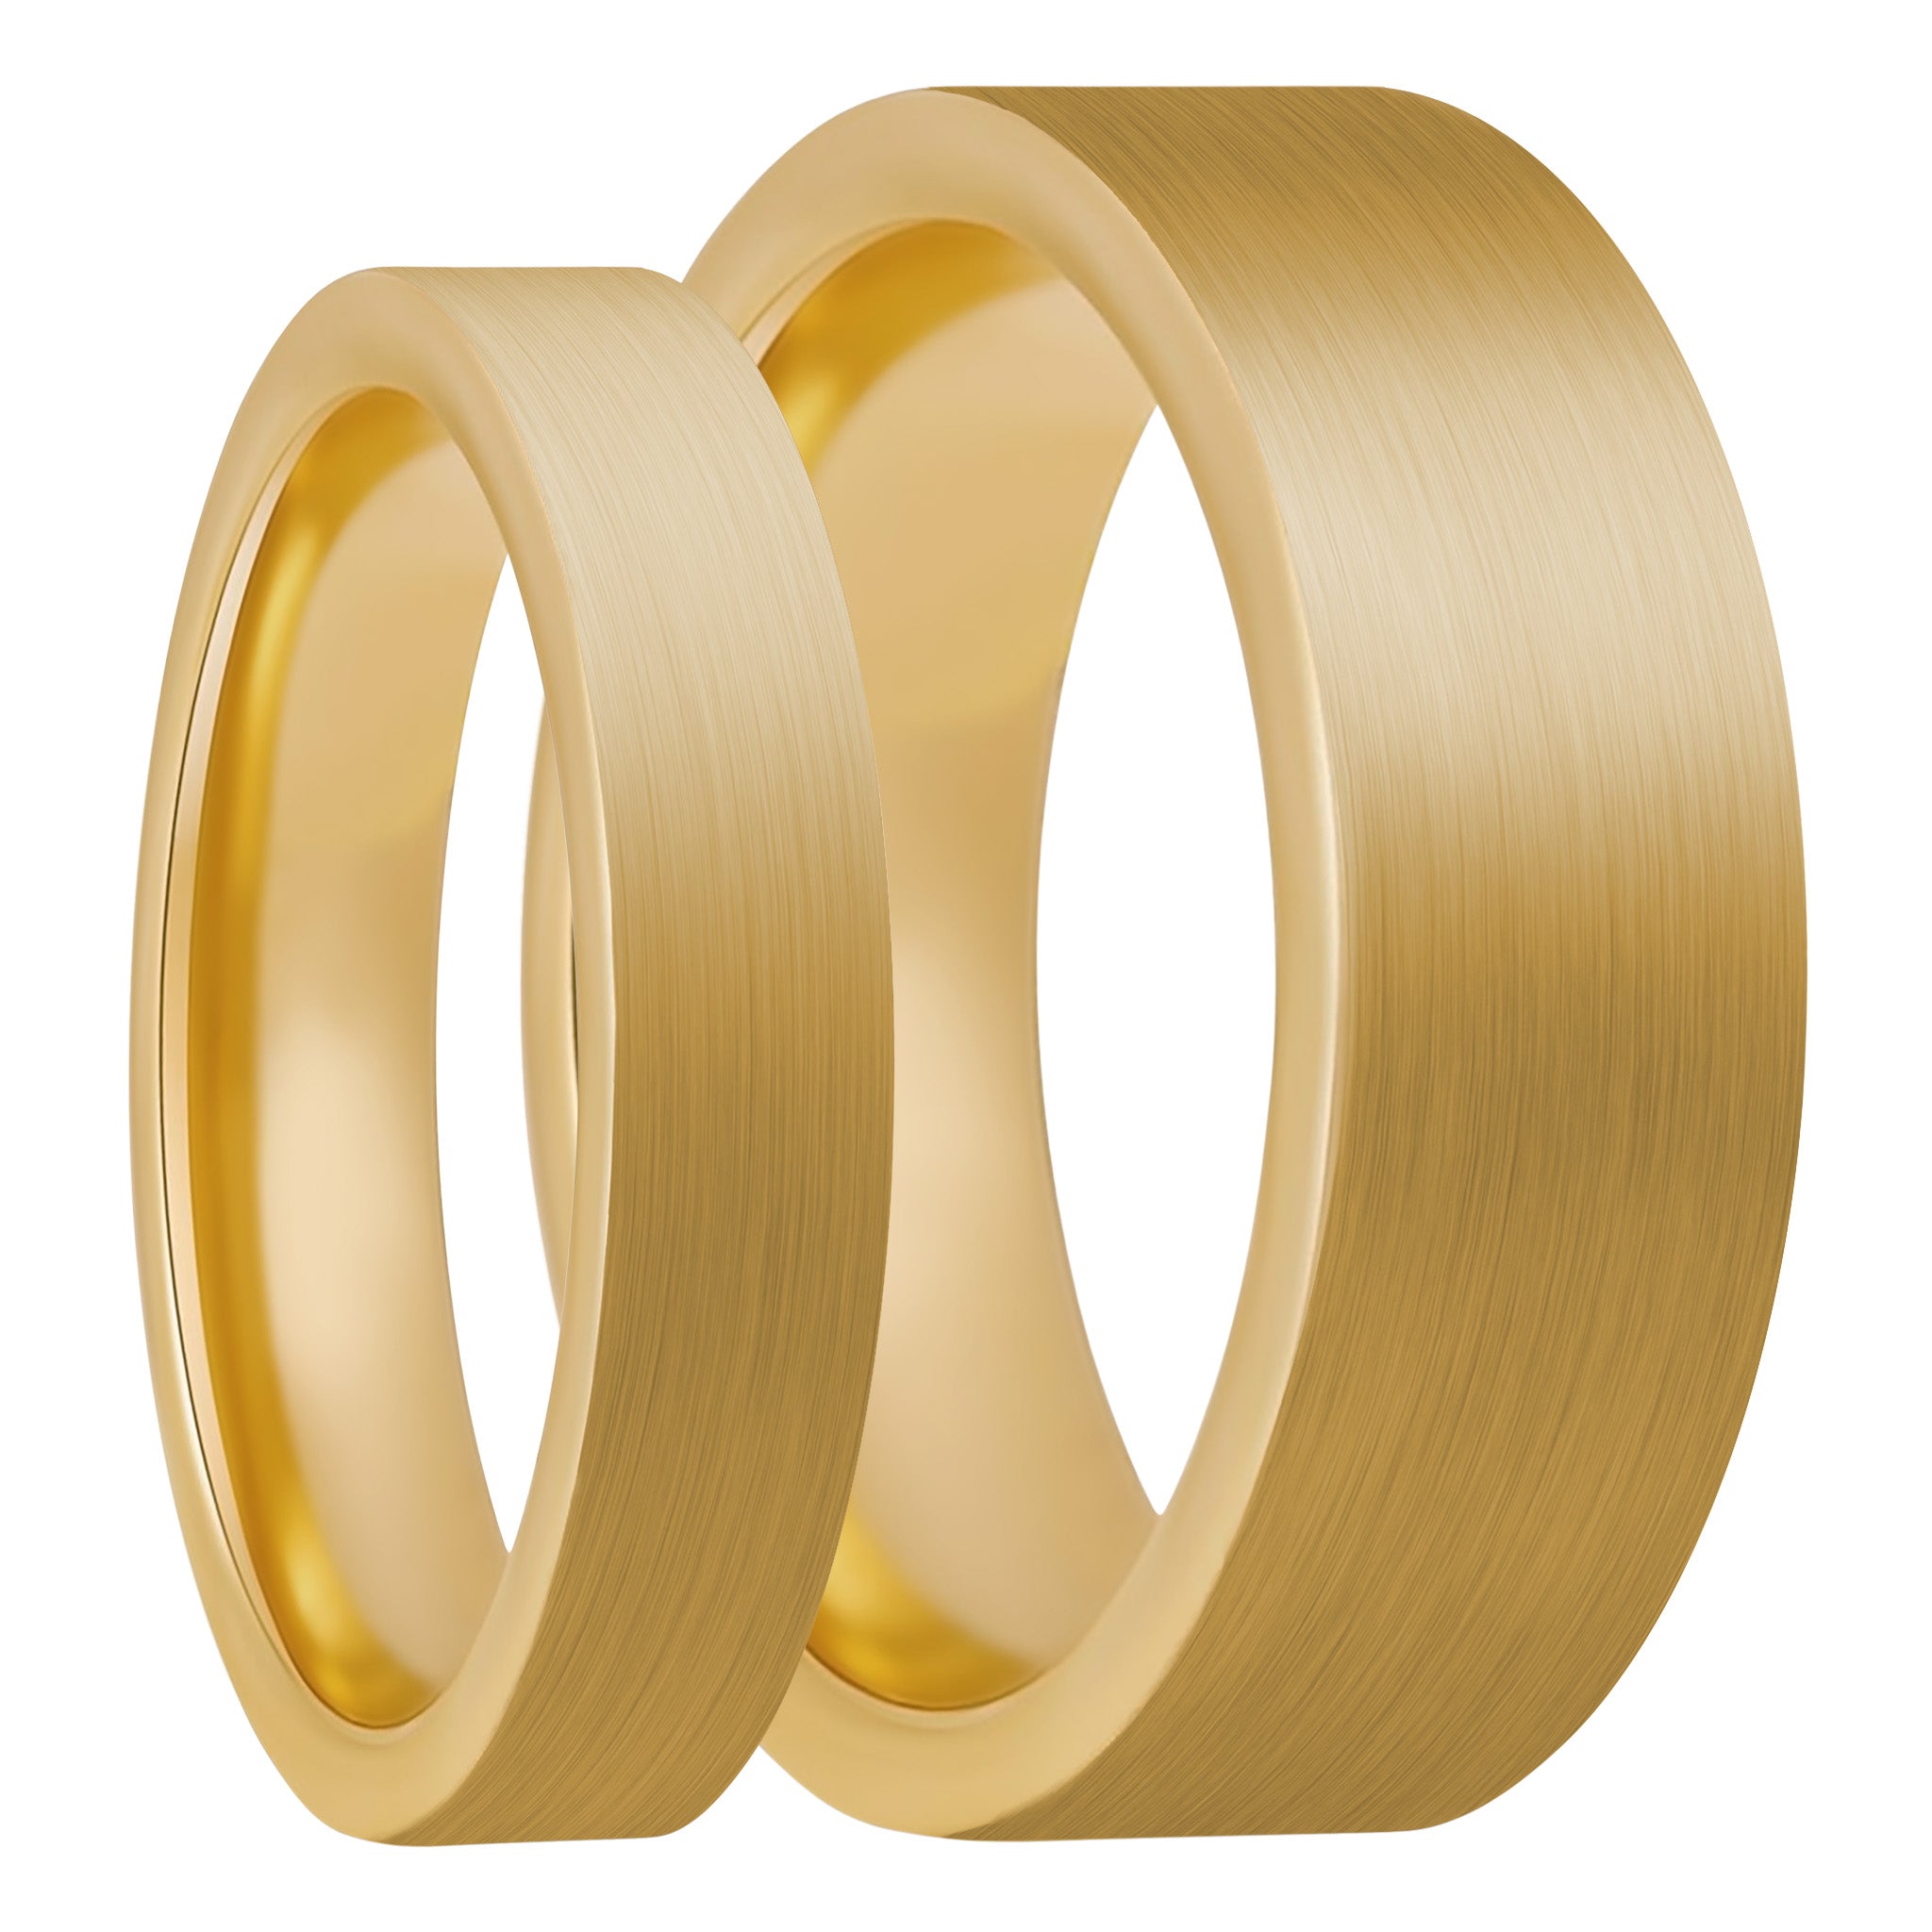 Do Wedding Bands Have to Match? – Modern Gents